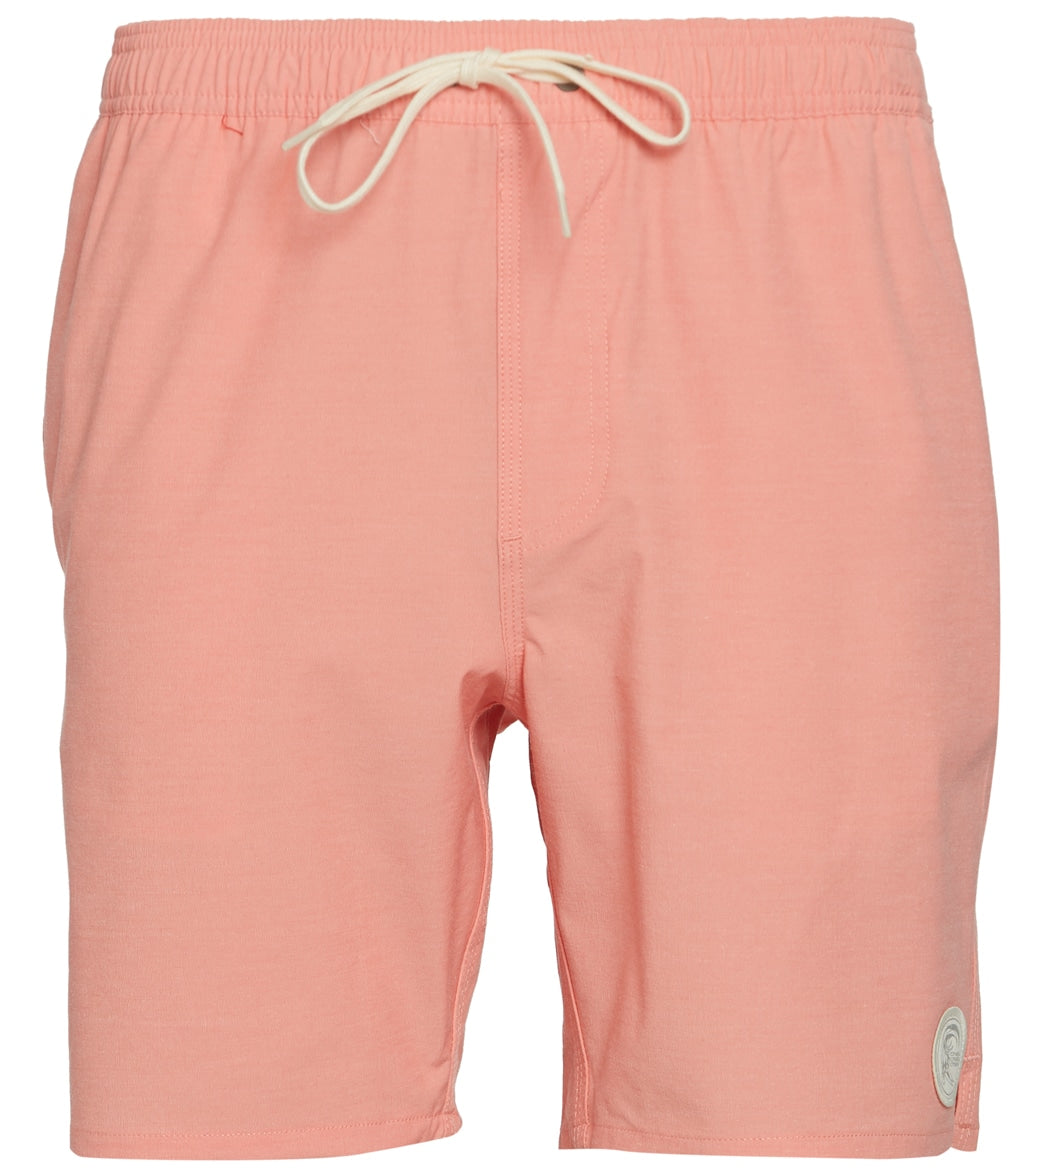 O'neill Men's 17 Solid Volley Short - Hot Coral Large Polyester - Swimoutlet.com